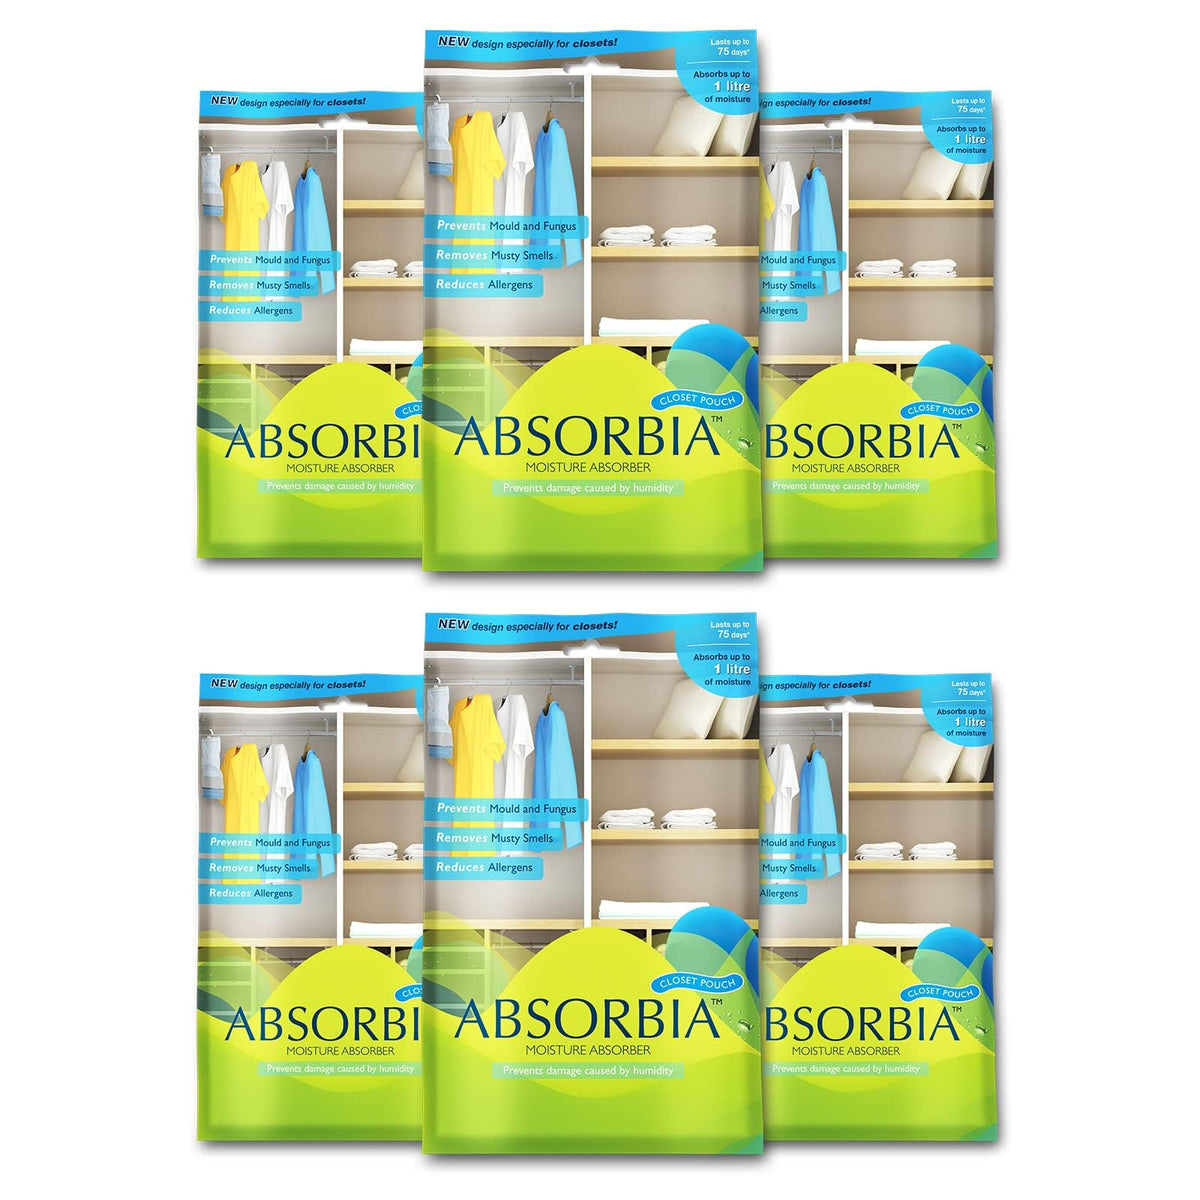 Absorbia Moisture Absorber| Absorbia Hanging Pouch - Season Pack of 12 (880ml Each) | Dehumidifier for Wardrobe, Closet Bathroom| Fights Against Moisture, Mould, Fungus Musty Smells‚Ä¶